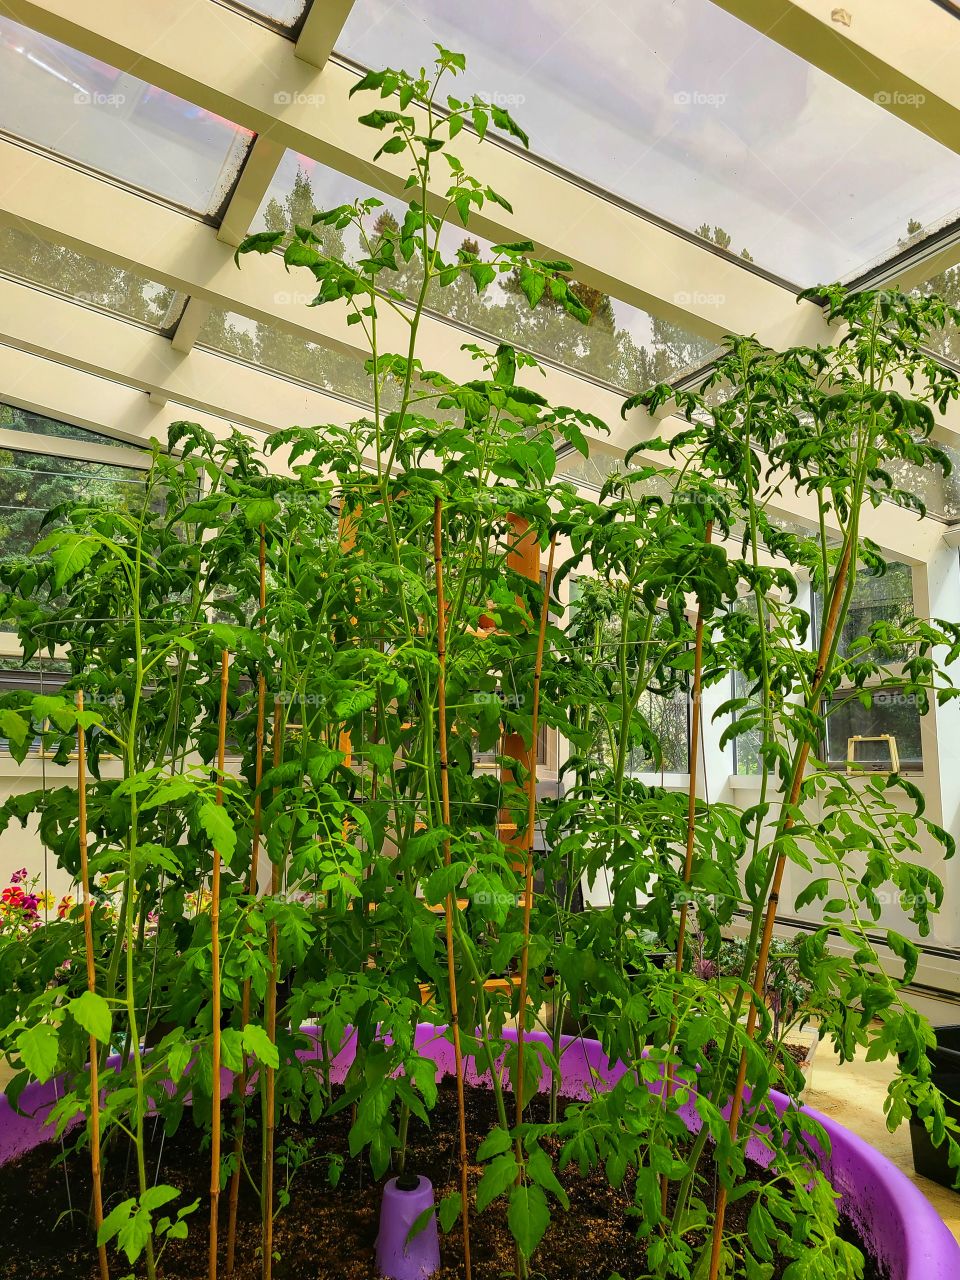 Tomato plants reaching to the top of the greenhouse glass